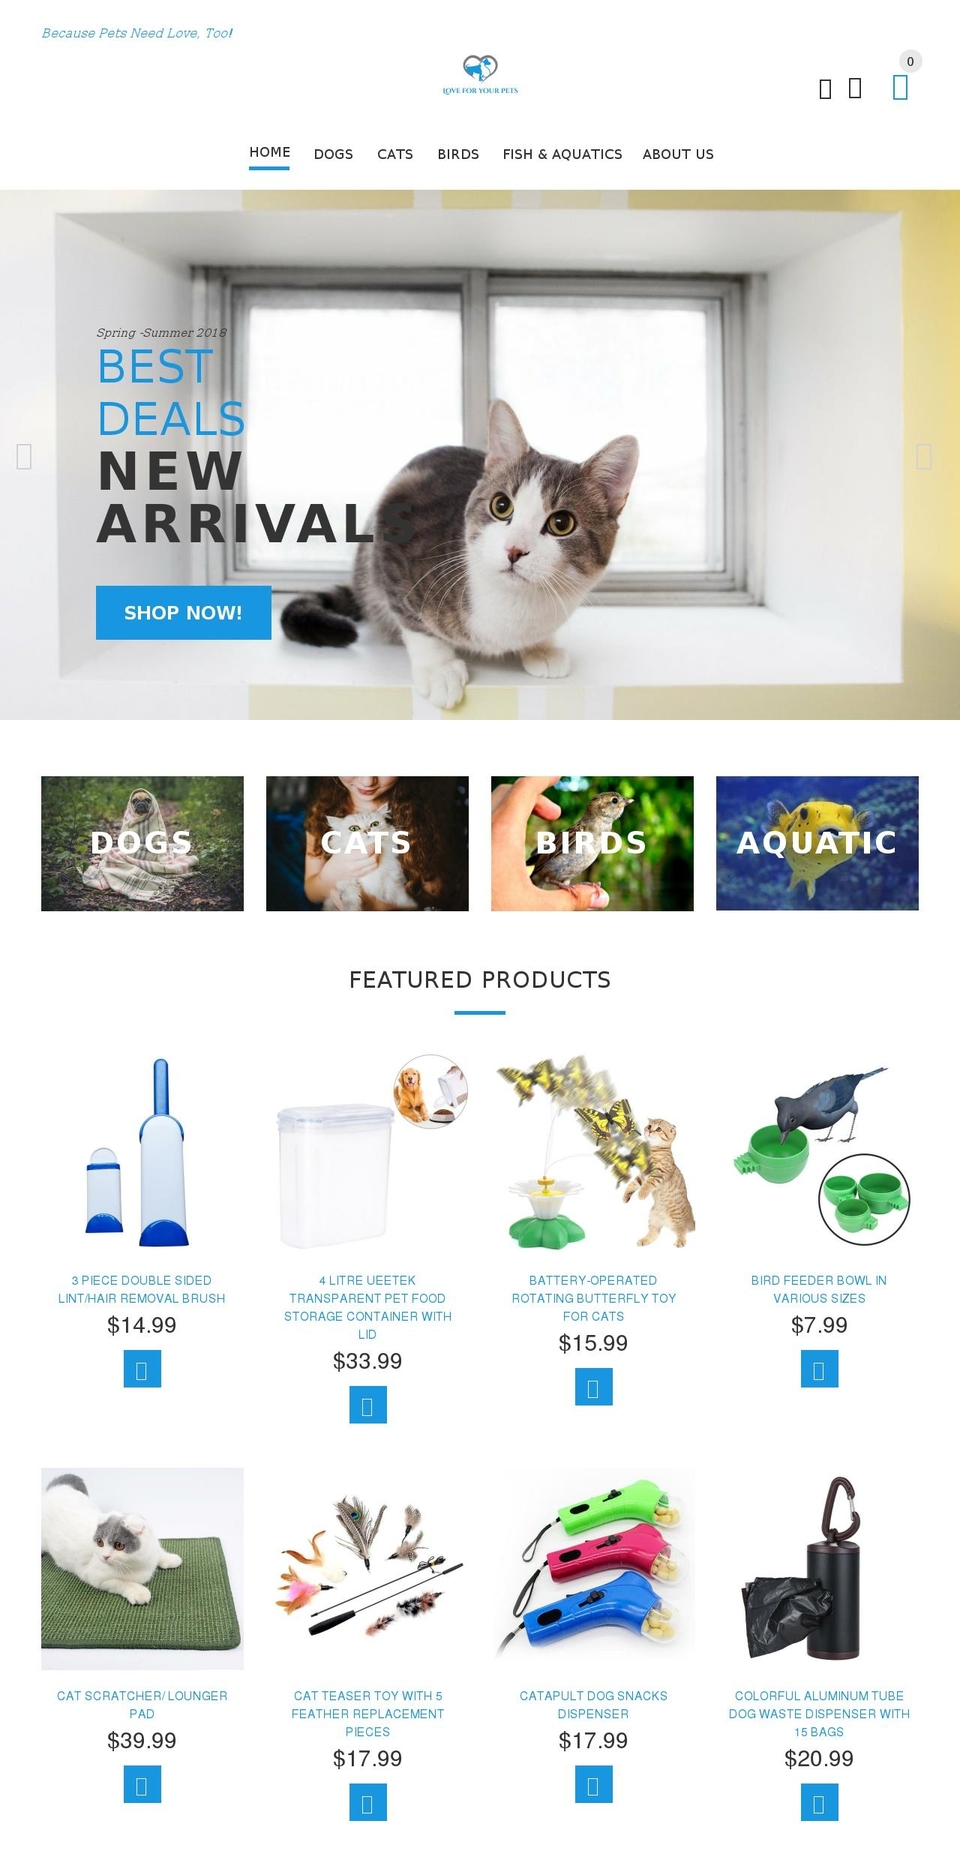 install-me-yourstore-v2-1-9 Shopify theme site example loveforyourpets.com